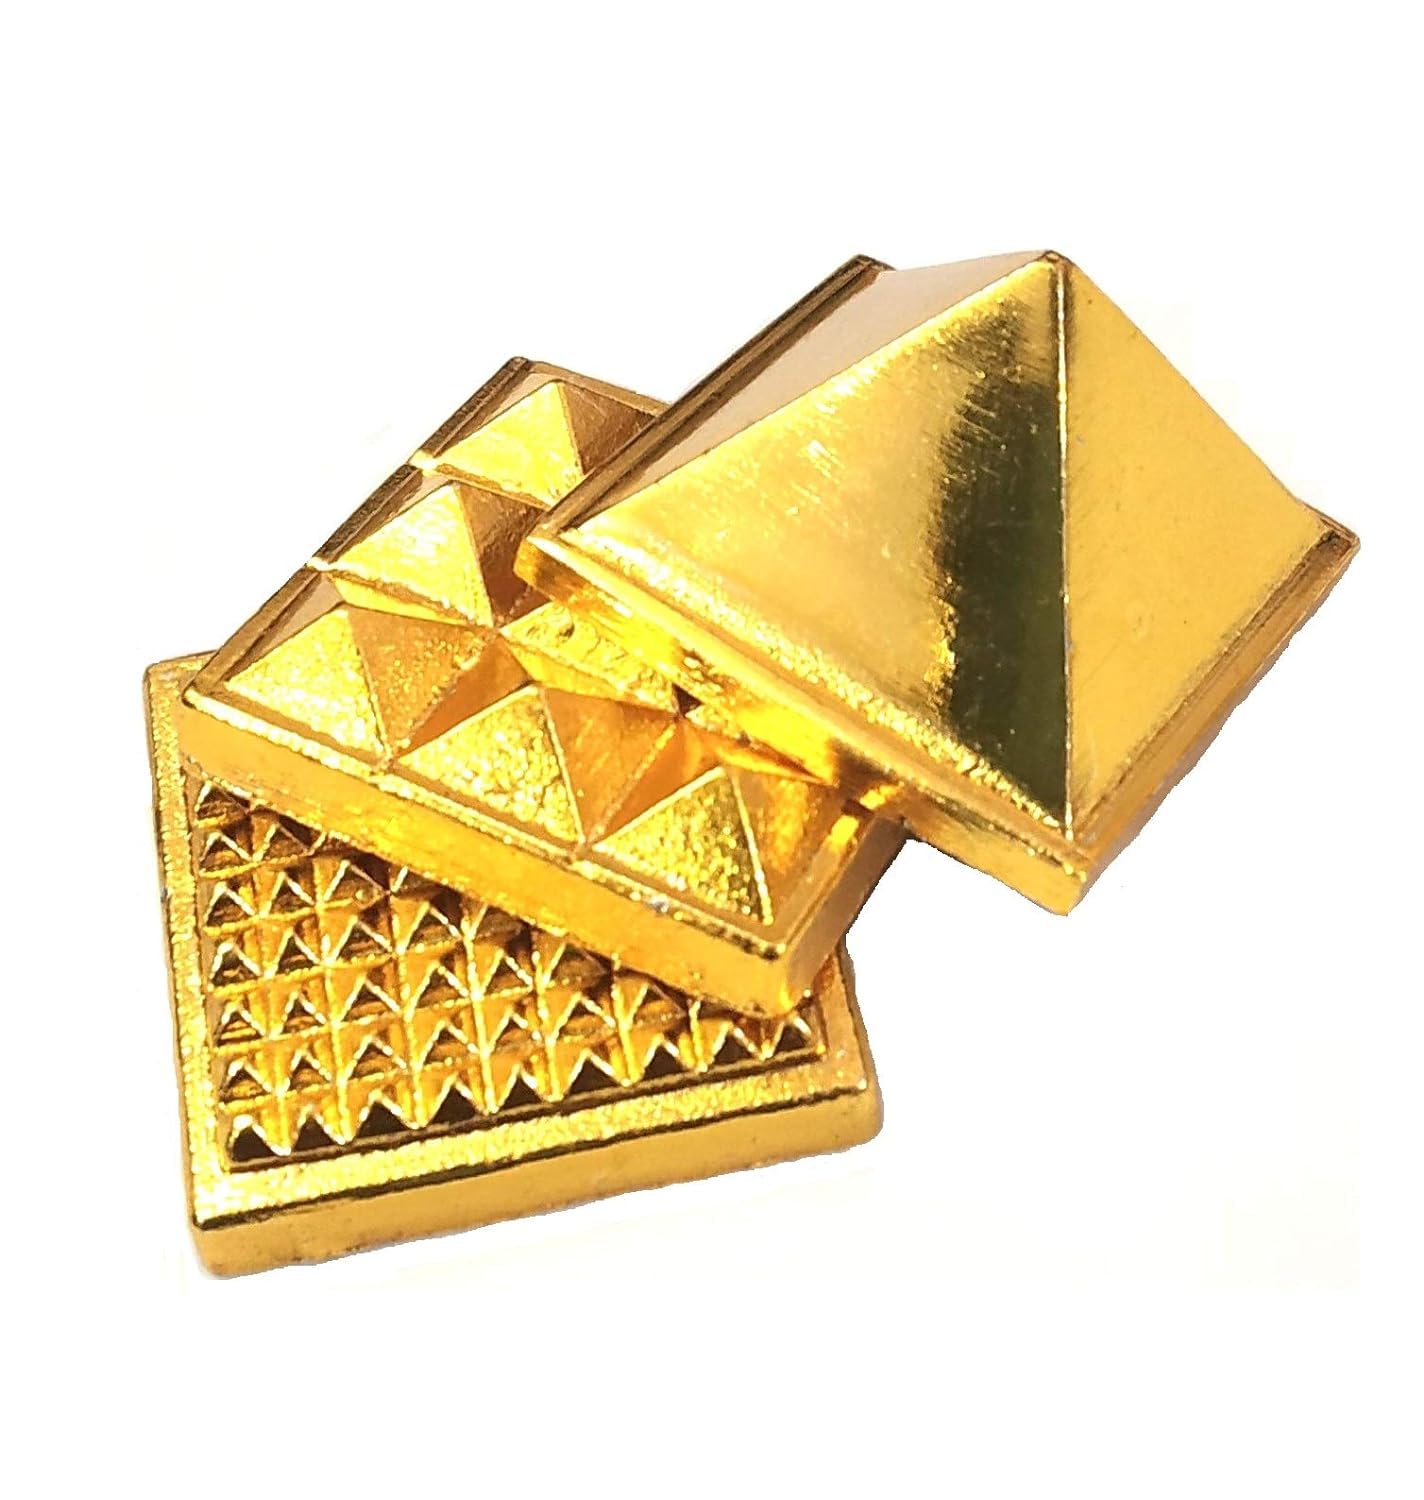 Pujahome Vastu Brass Pyramid That Spreads Positive Vibes, 3 Layer Metal Pyramid 2 inch for Home & Office